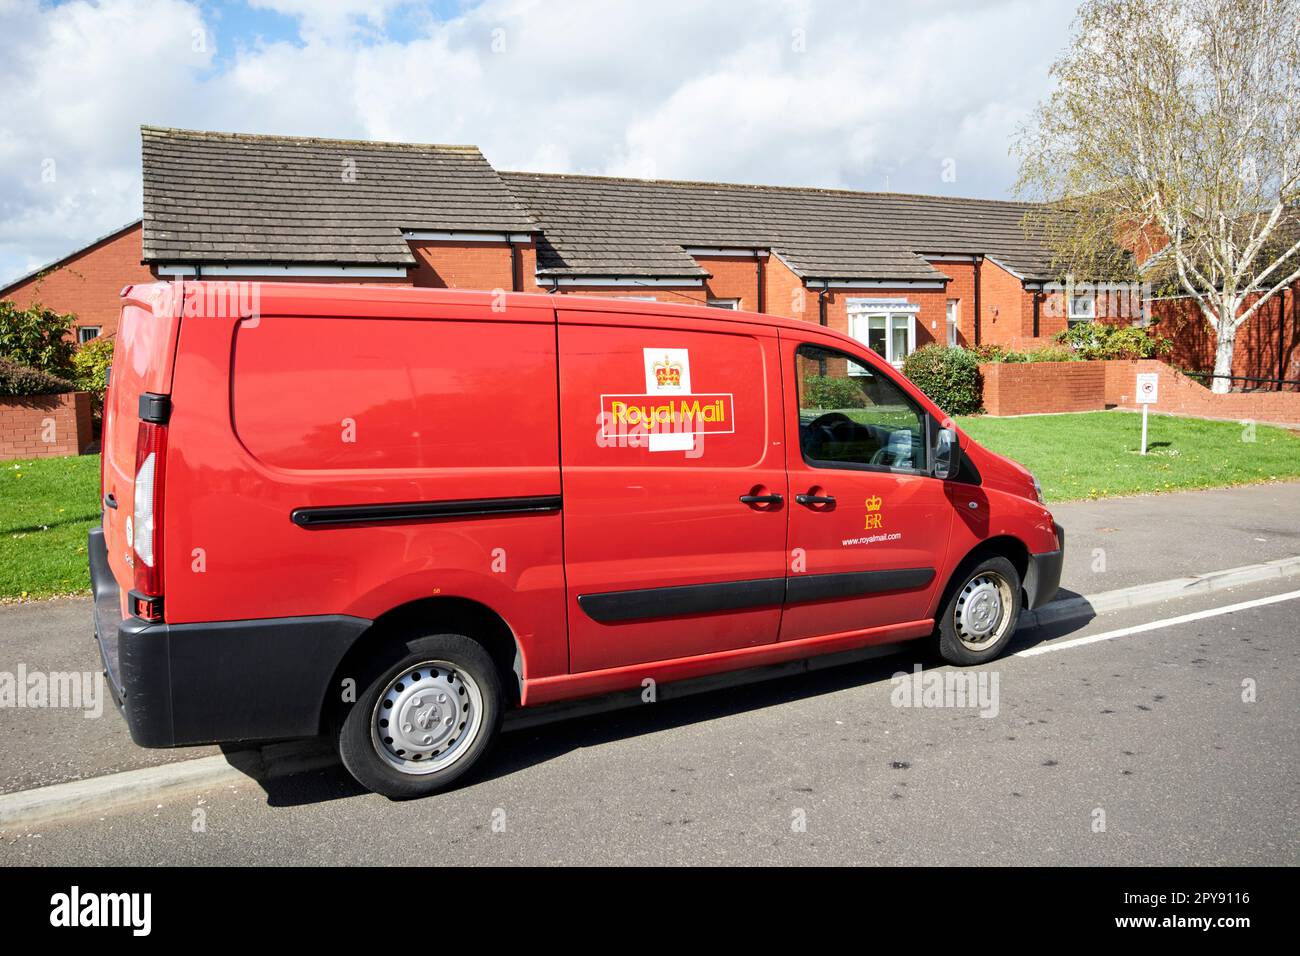 royal mail postal delivery van parked on pavement in front of social housing south belfast northern ireland uk Stock Photo